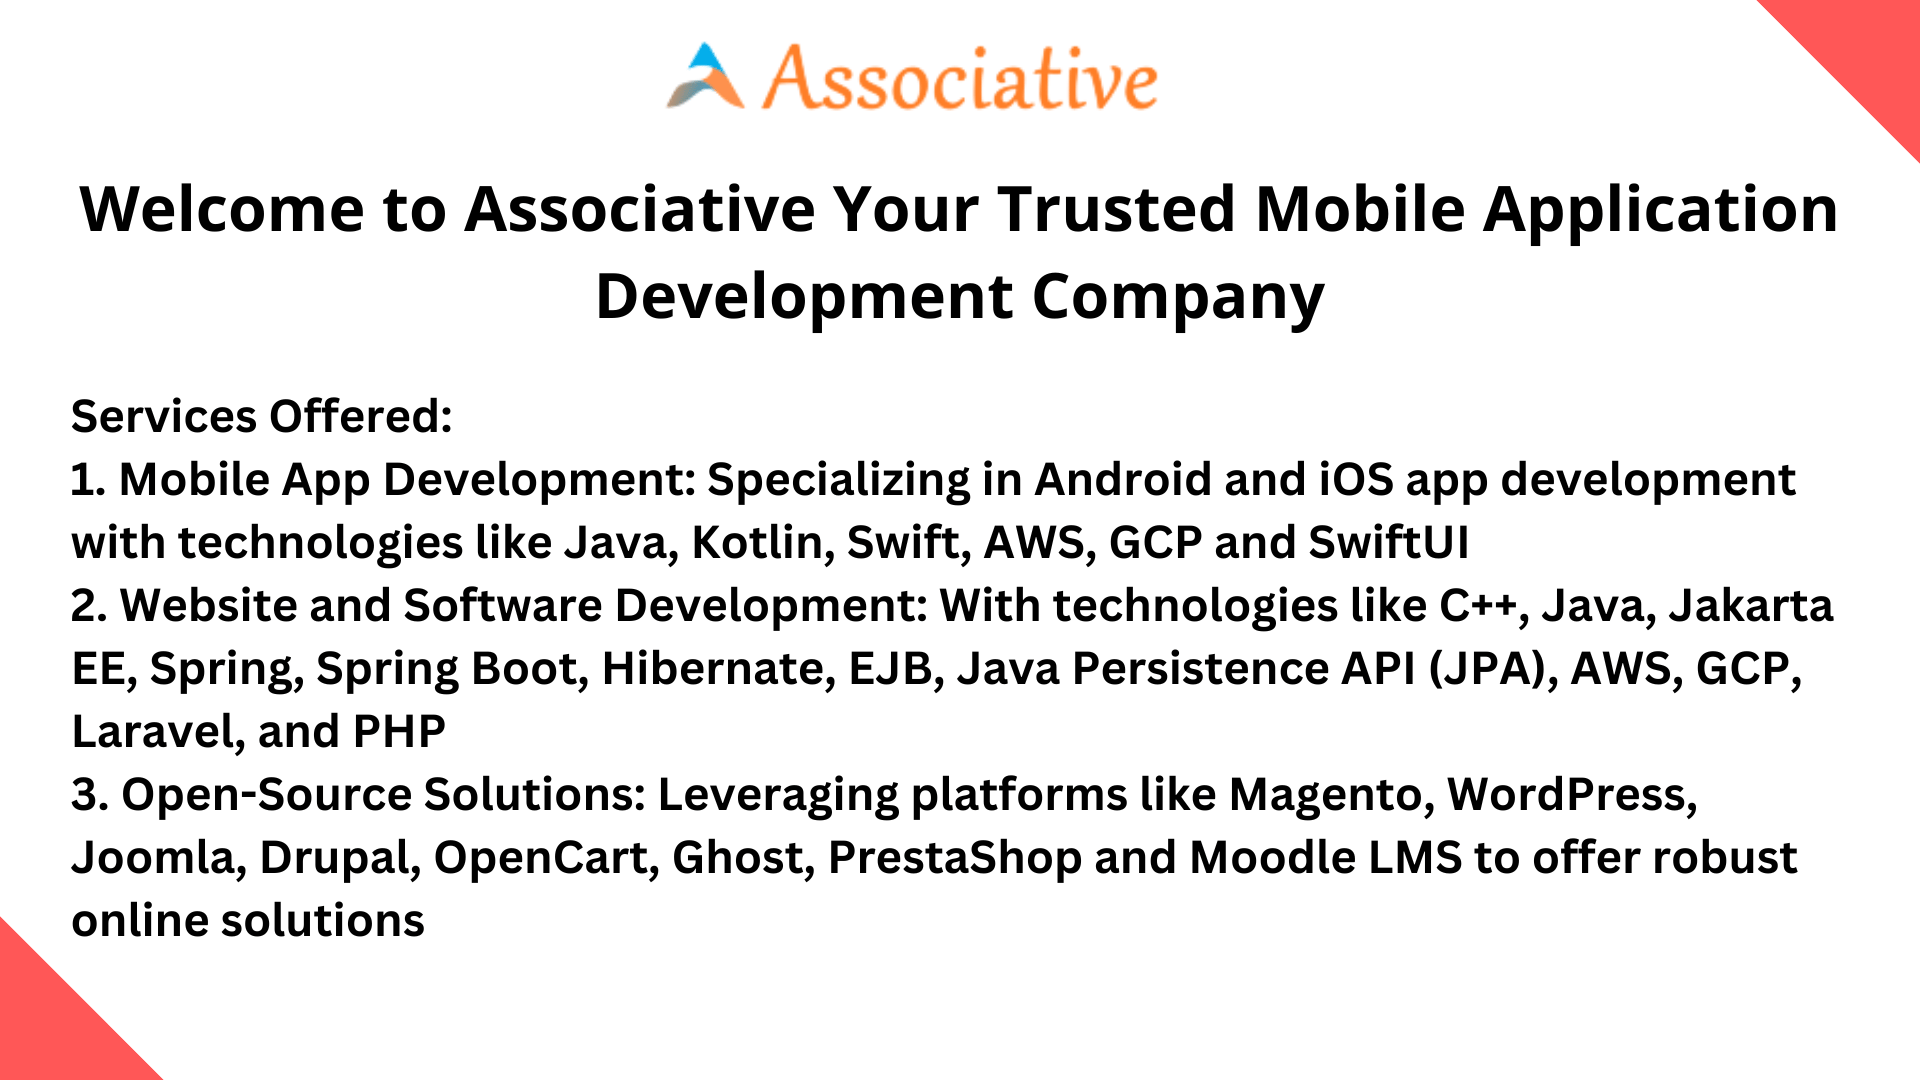 Welcome to Associative Your Trusted Mobile Application Development Company